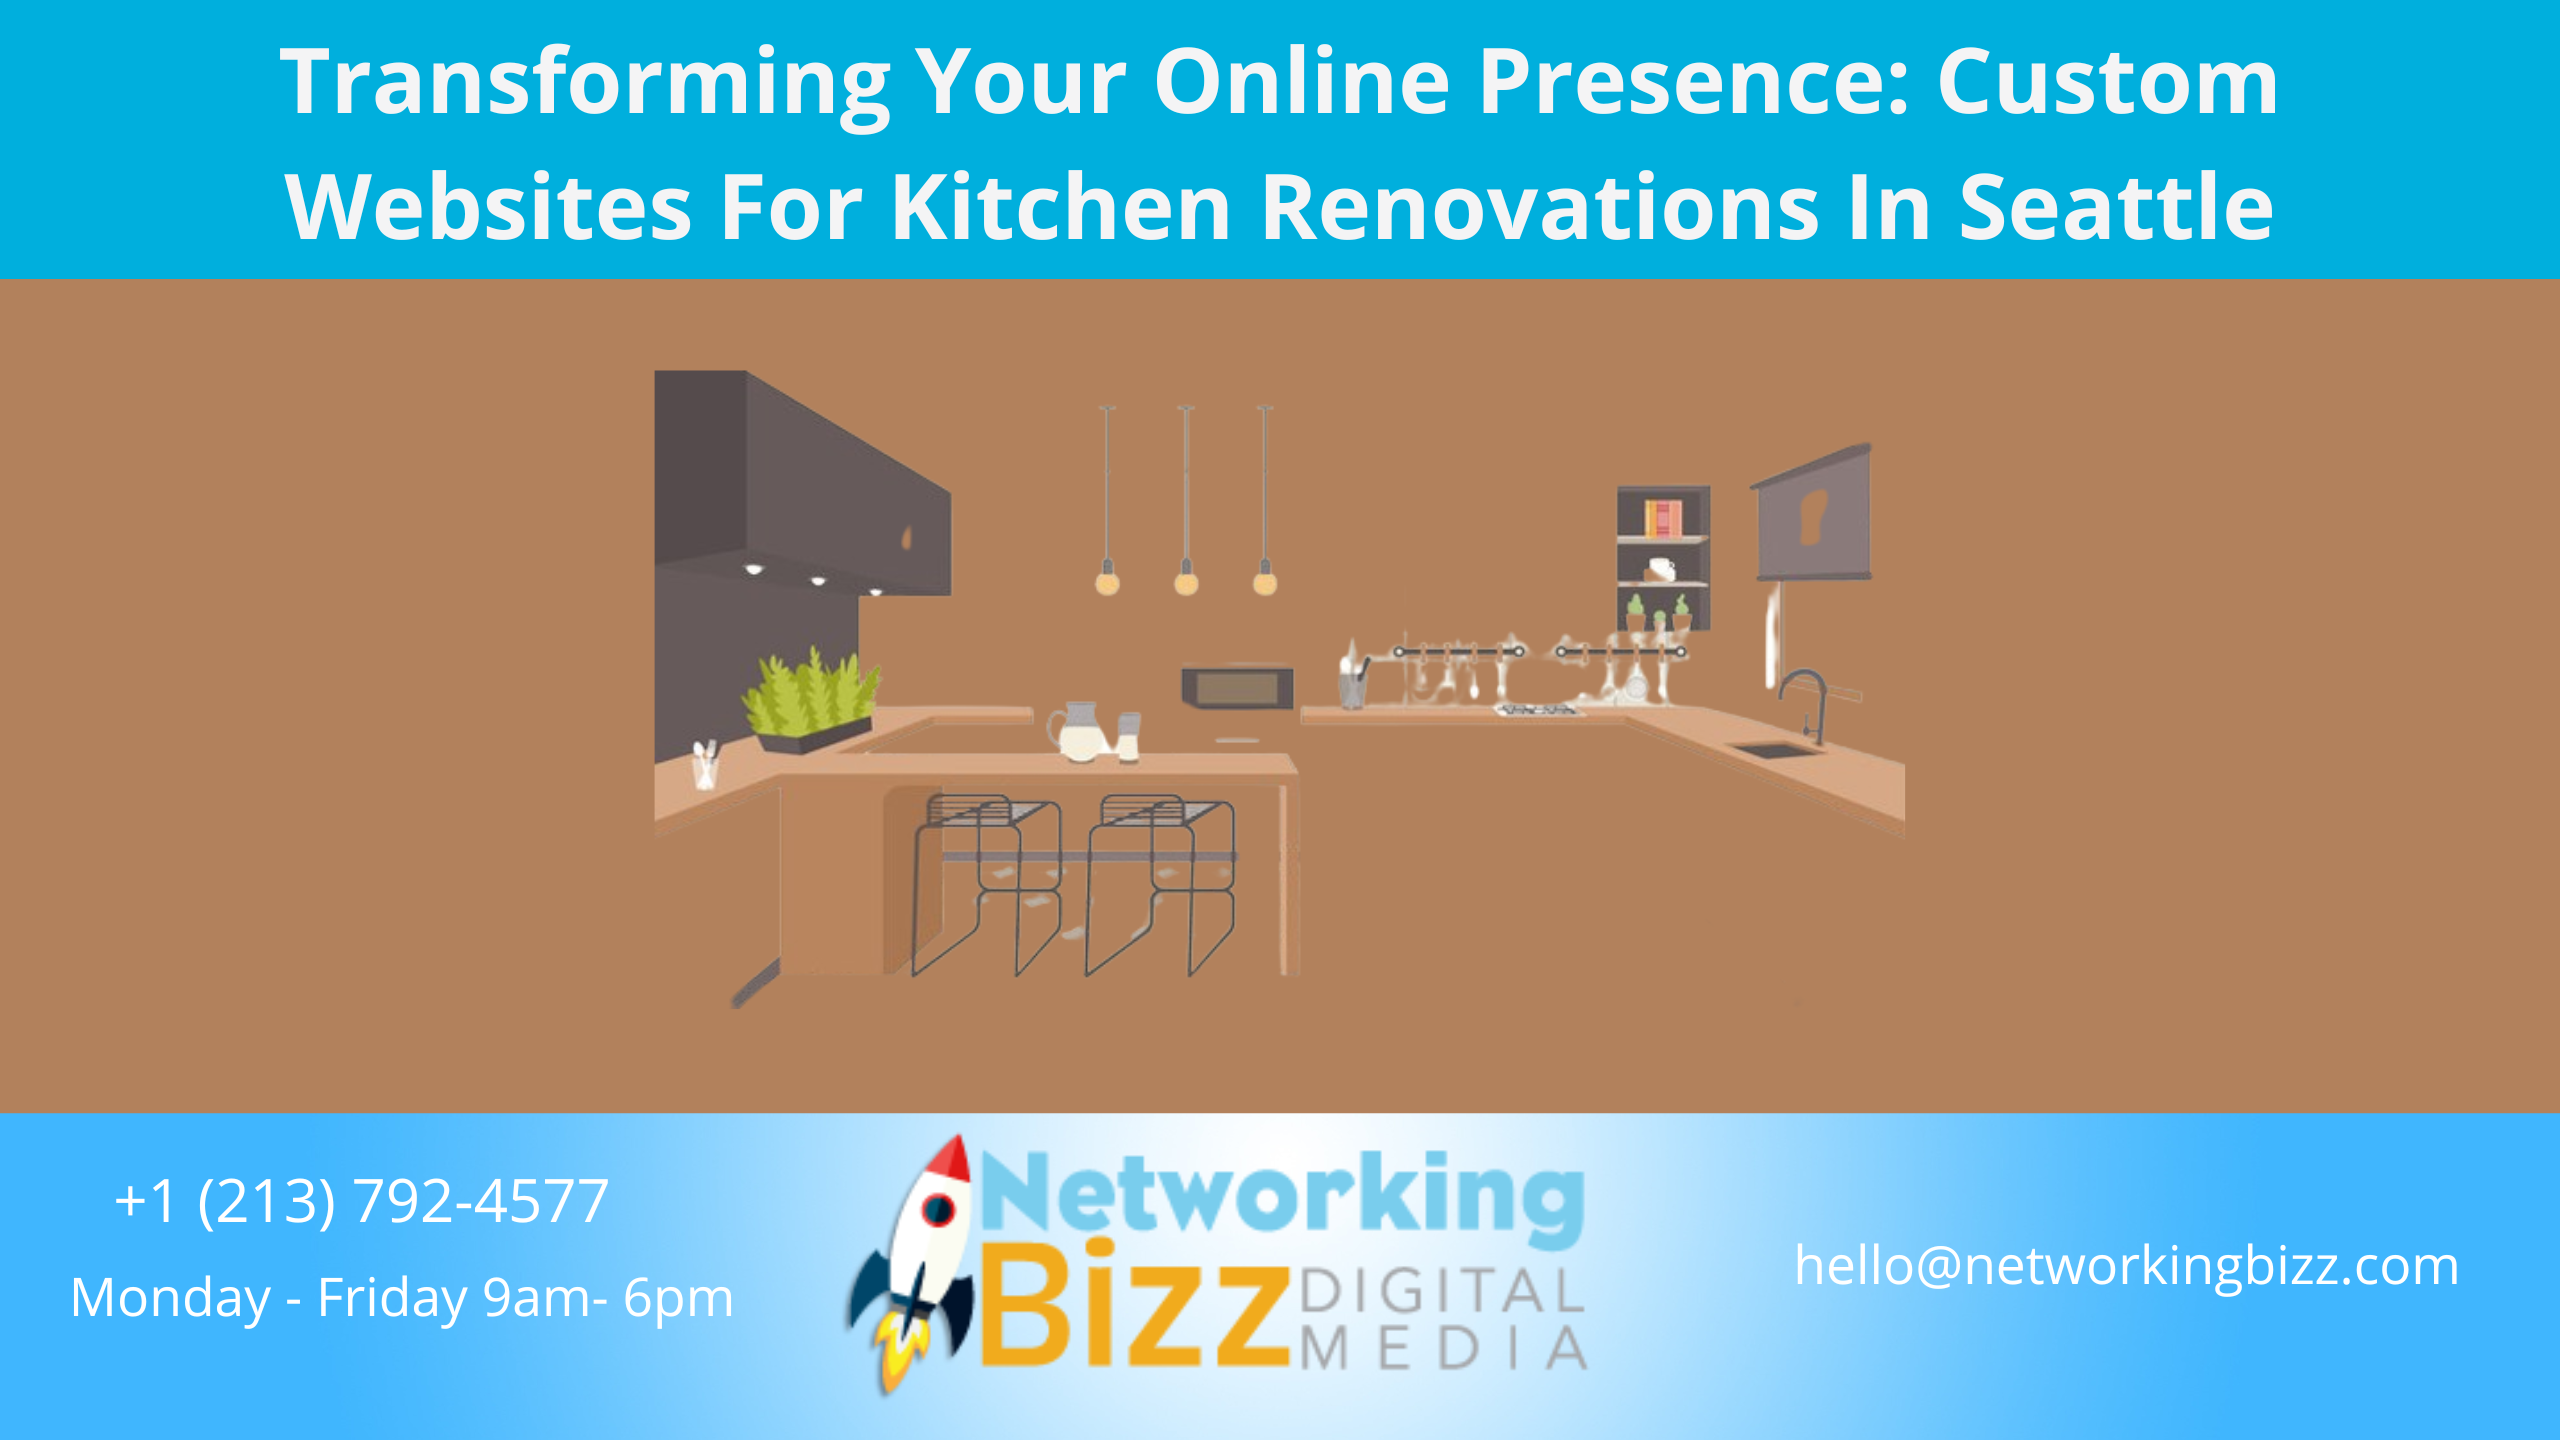 Transforming Your Online Presence: Custom Websites For Kitchen Renovations In Seattle